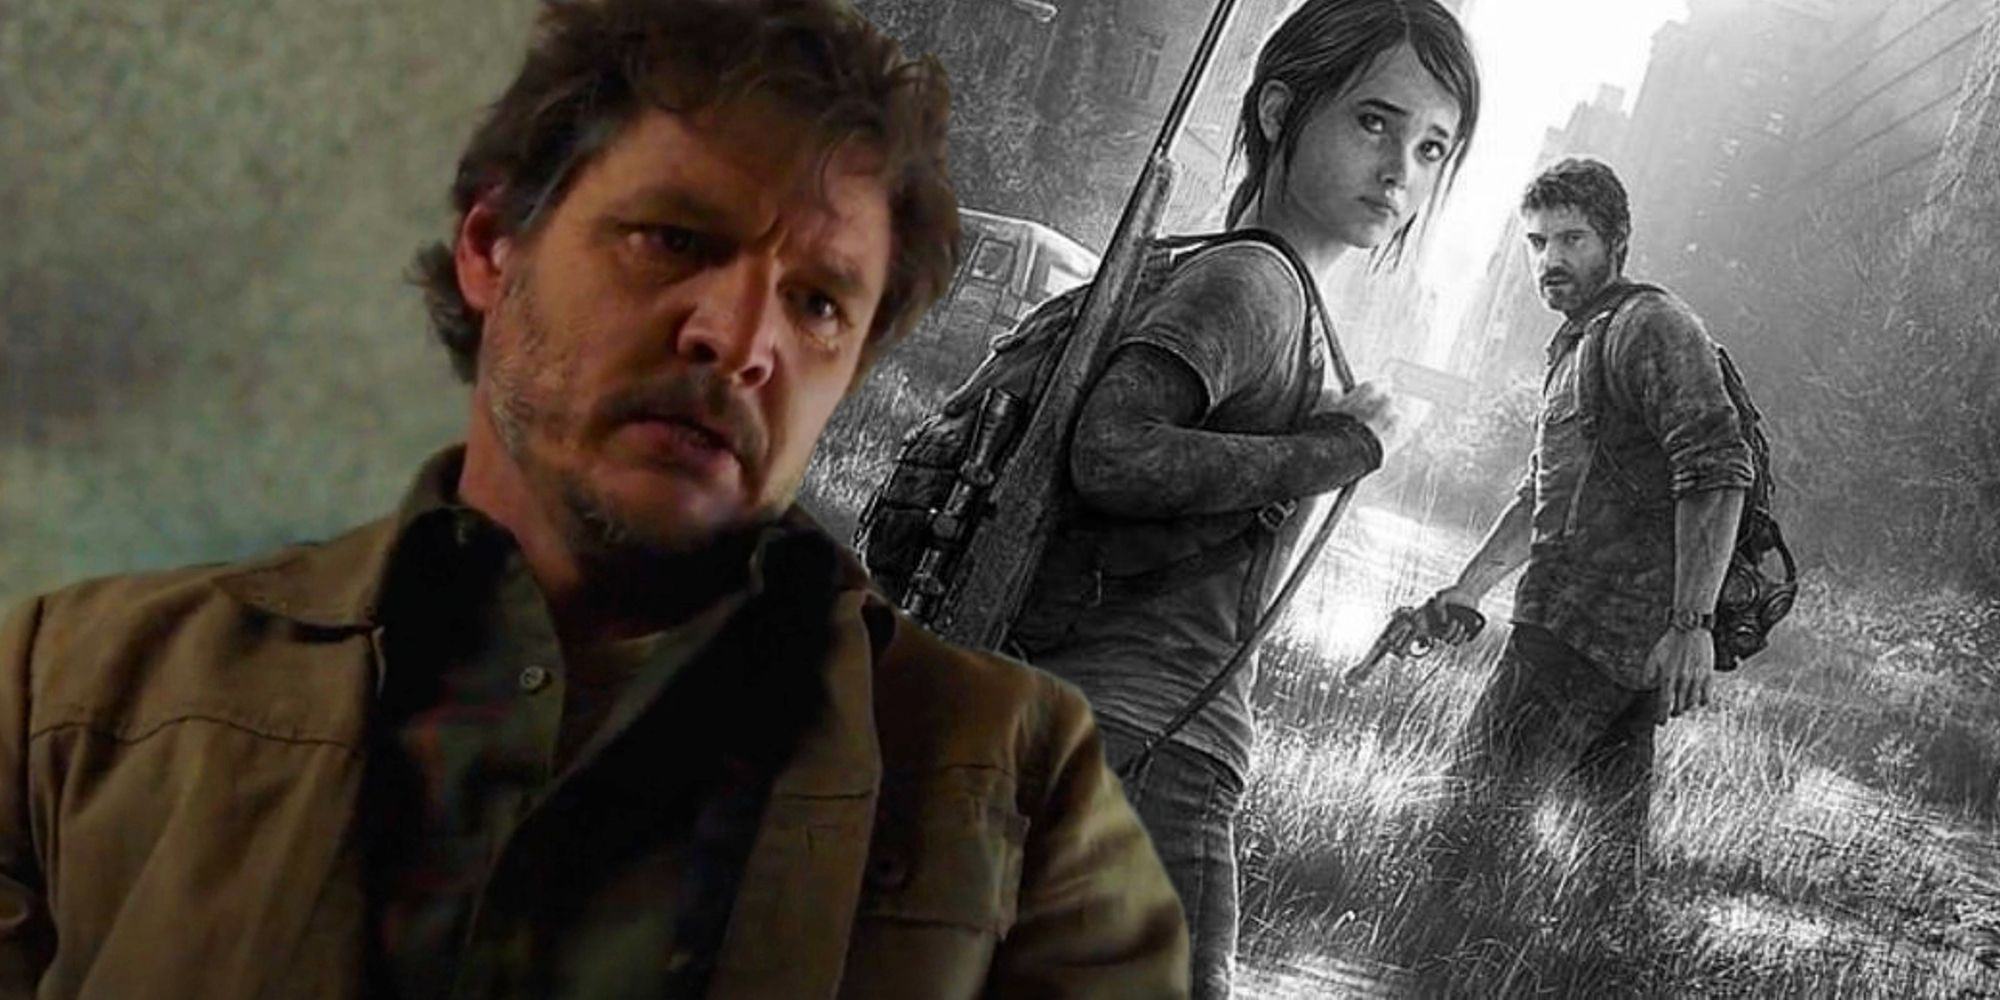 Joel belittles his captor next to the original poster of the game in The Last of Us Episode 8